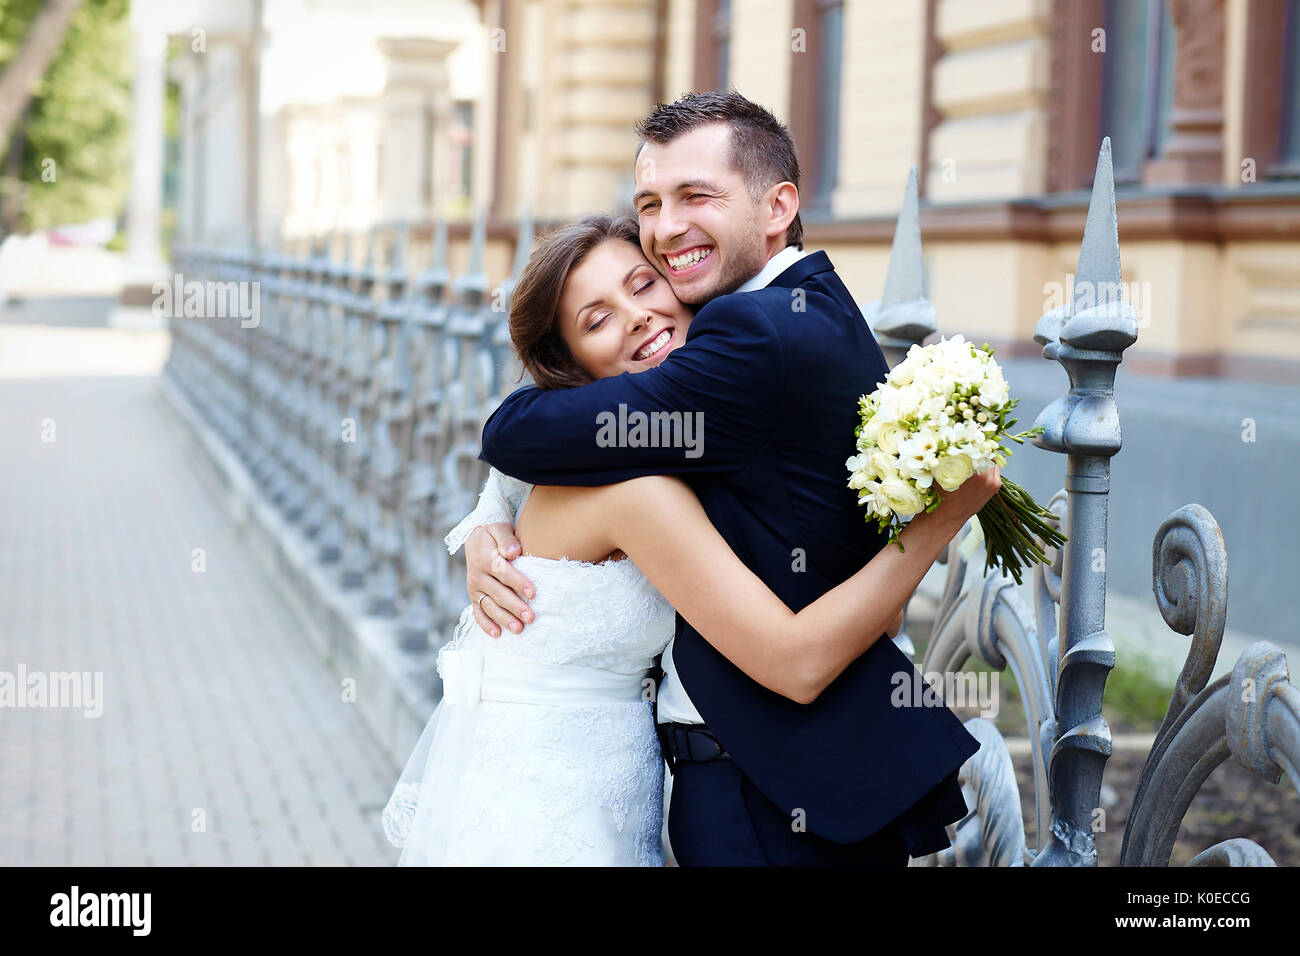 Happy Bride and Groom laughing smiling hugging on jour de mariage Banque D'Images